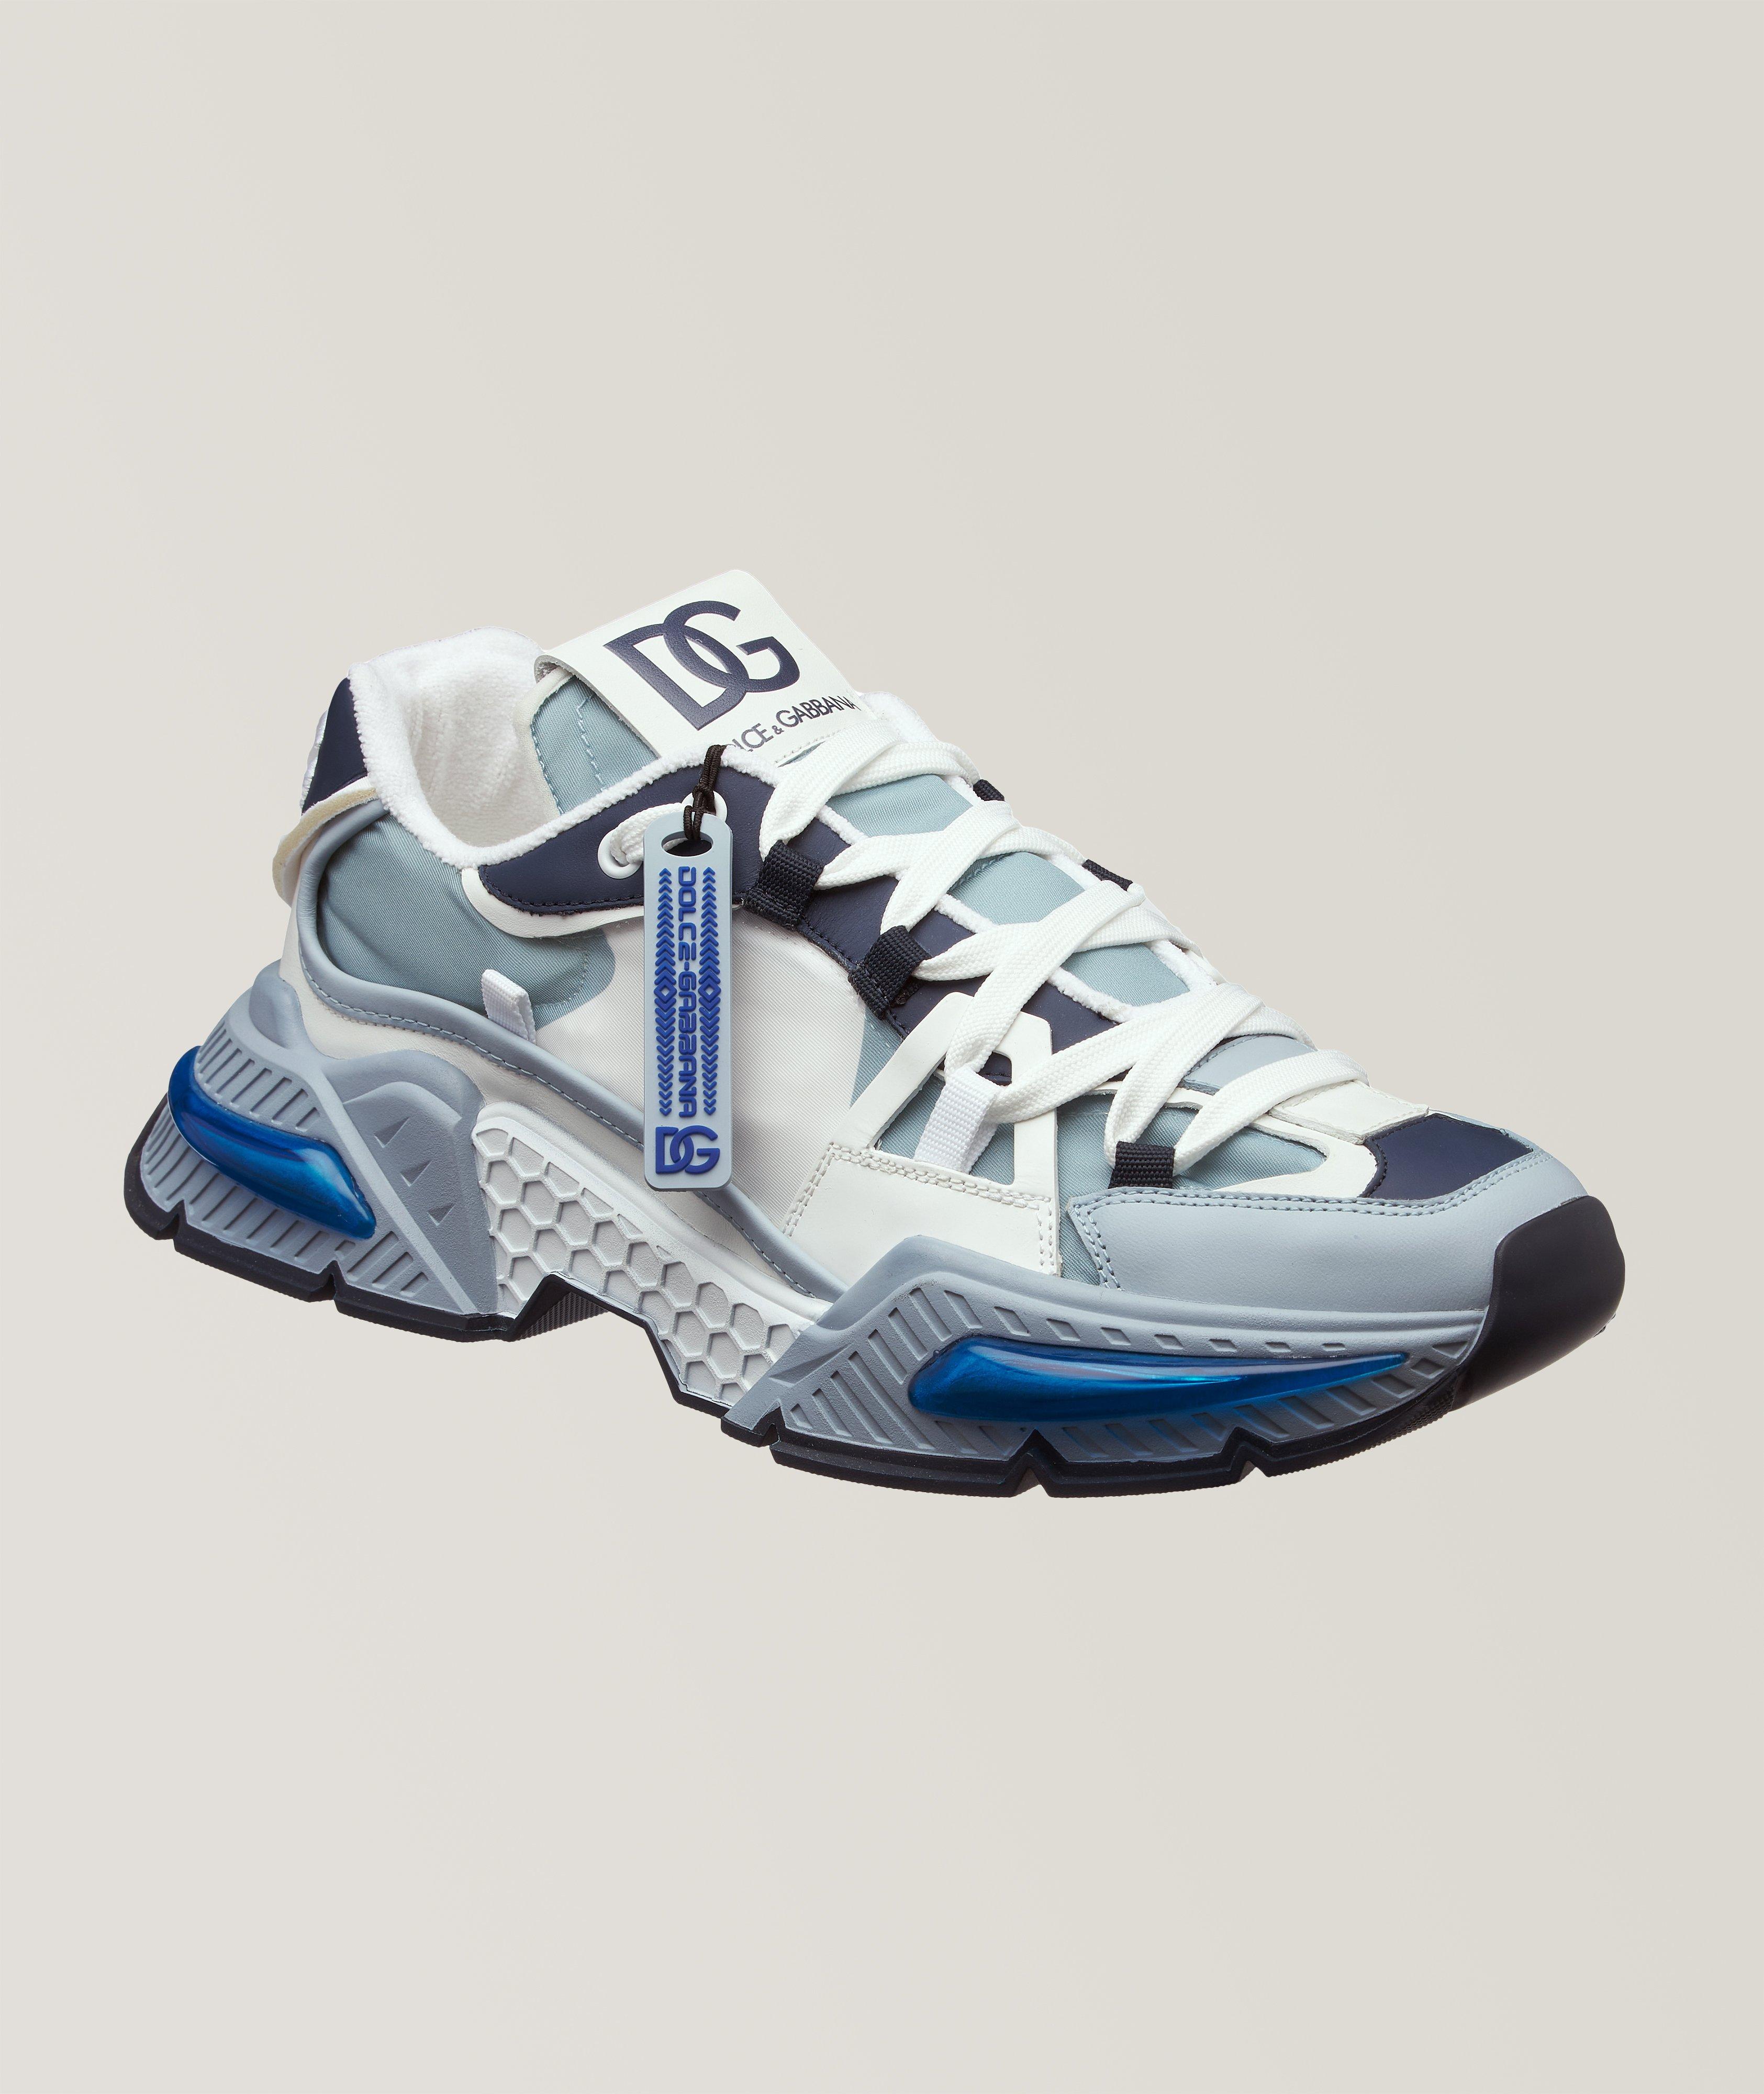 Chaussure sport Airmaster image 0